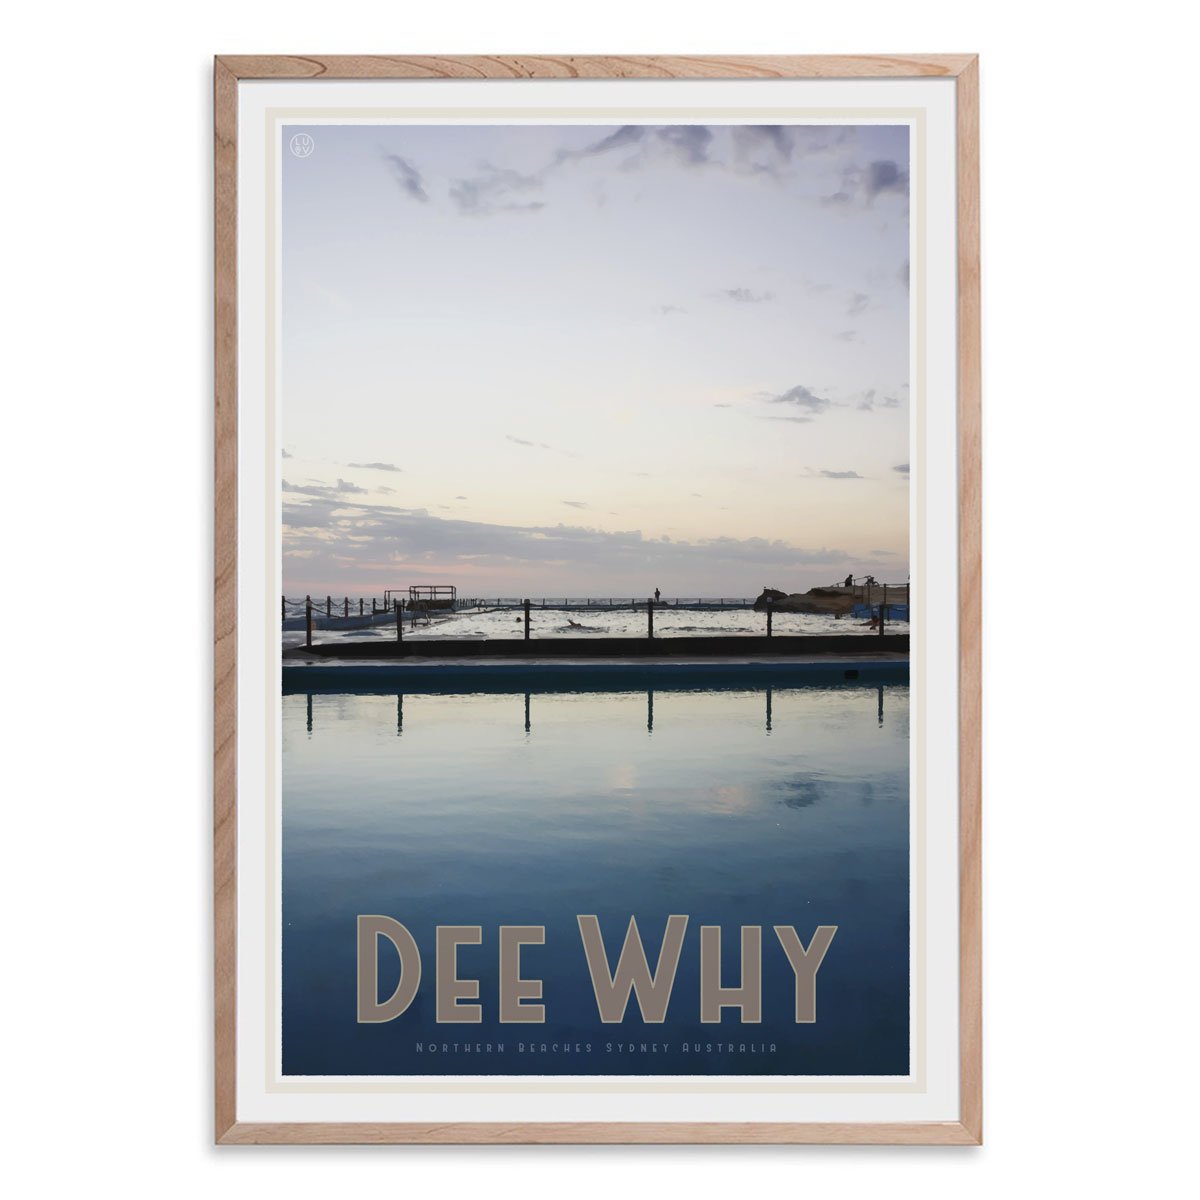 Dee Why oak framed print. vintage travel style by places we luv